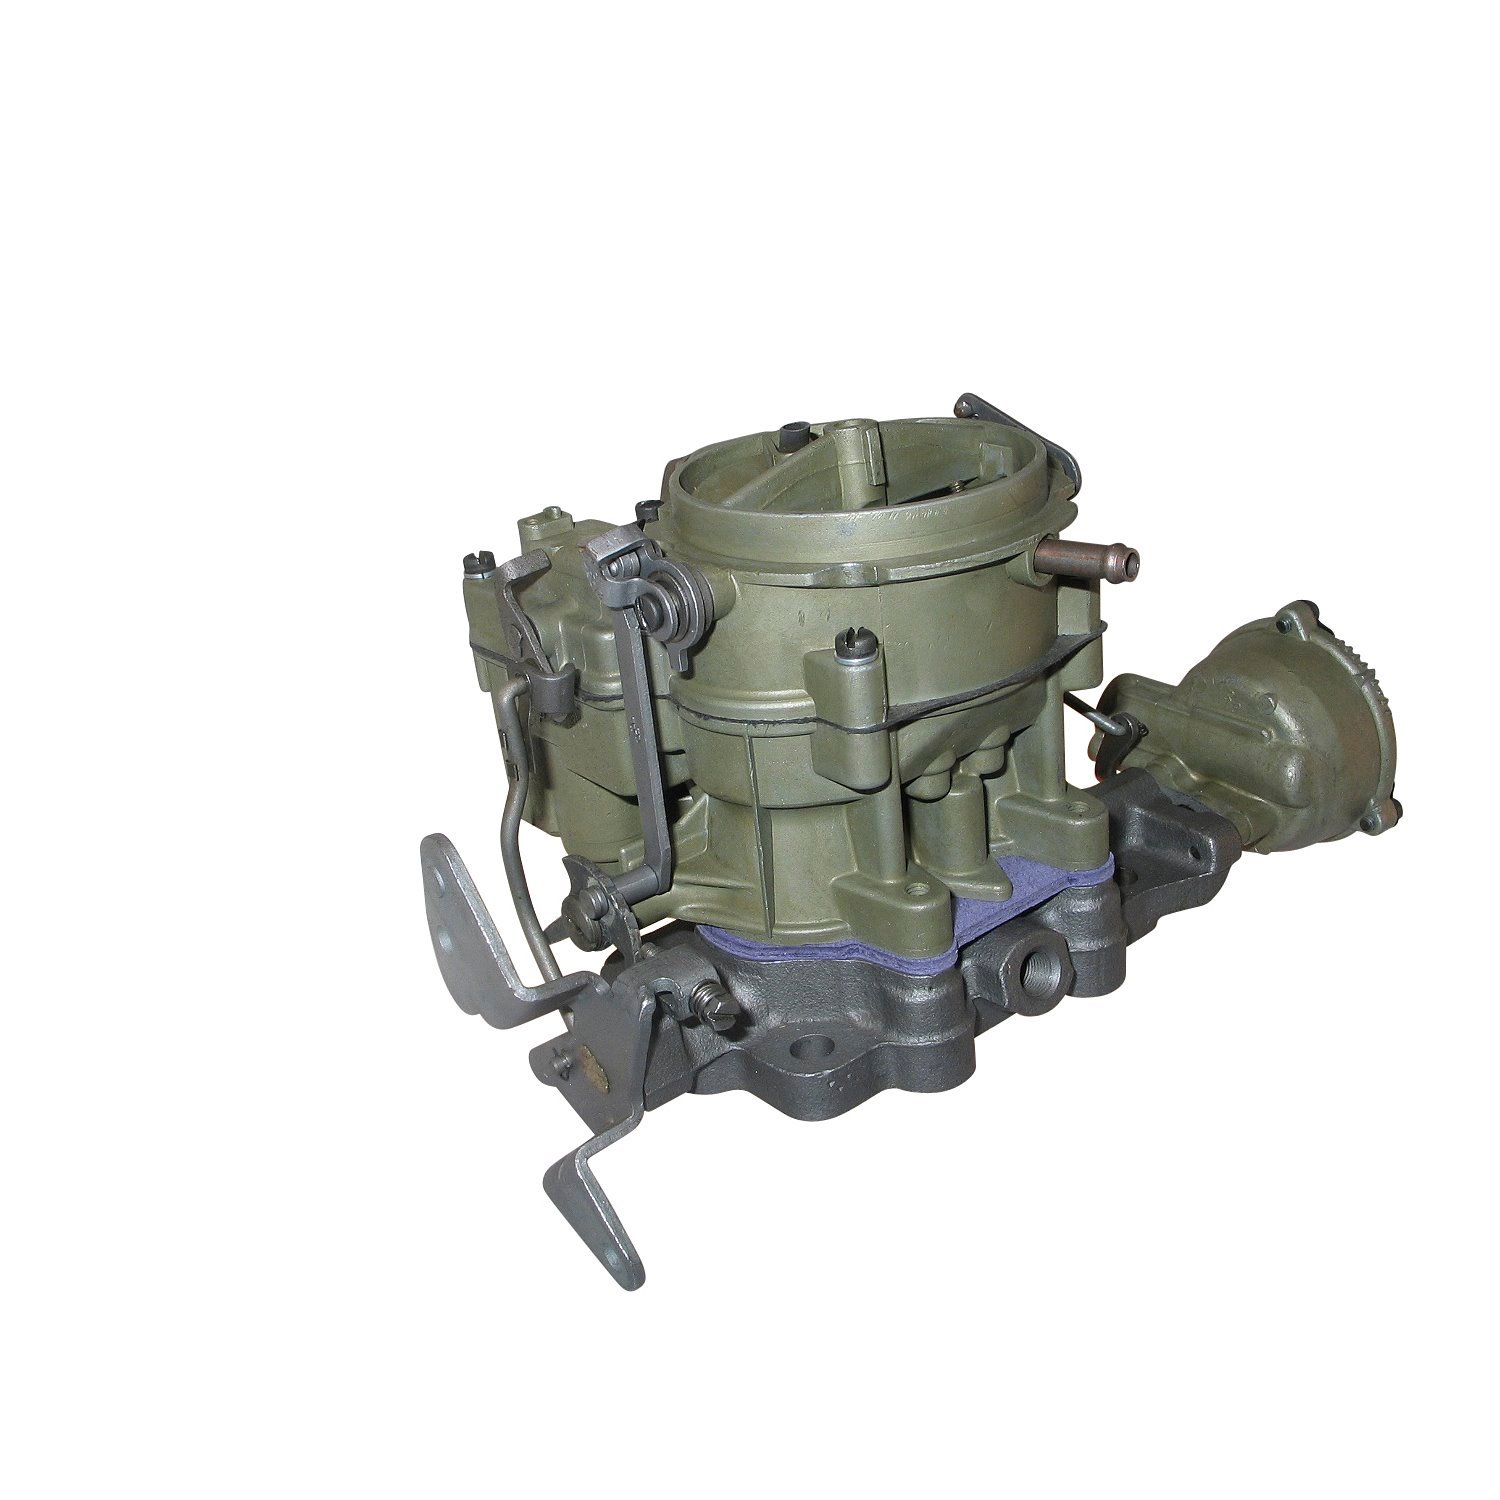 14-1467 Rochester Remanufactured Carburetor, 2GC-Style